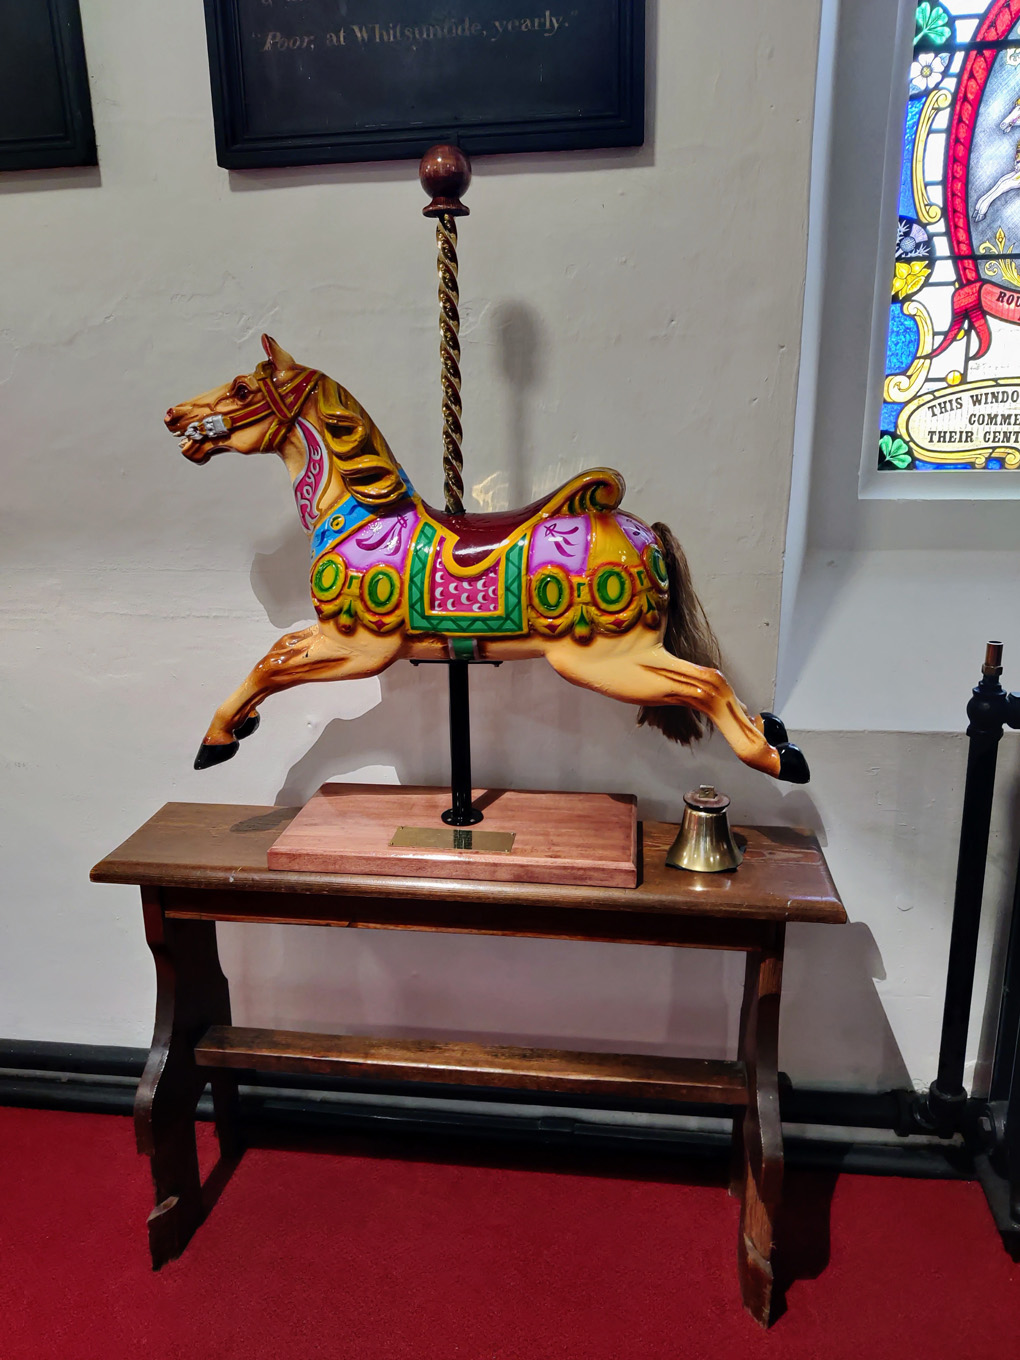 Picture of a wooden fairground horse in a church in Neath.